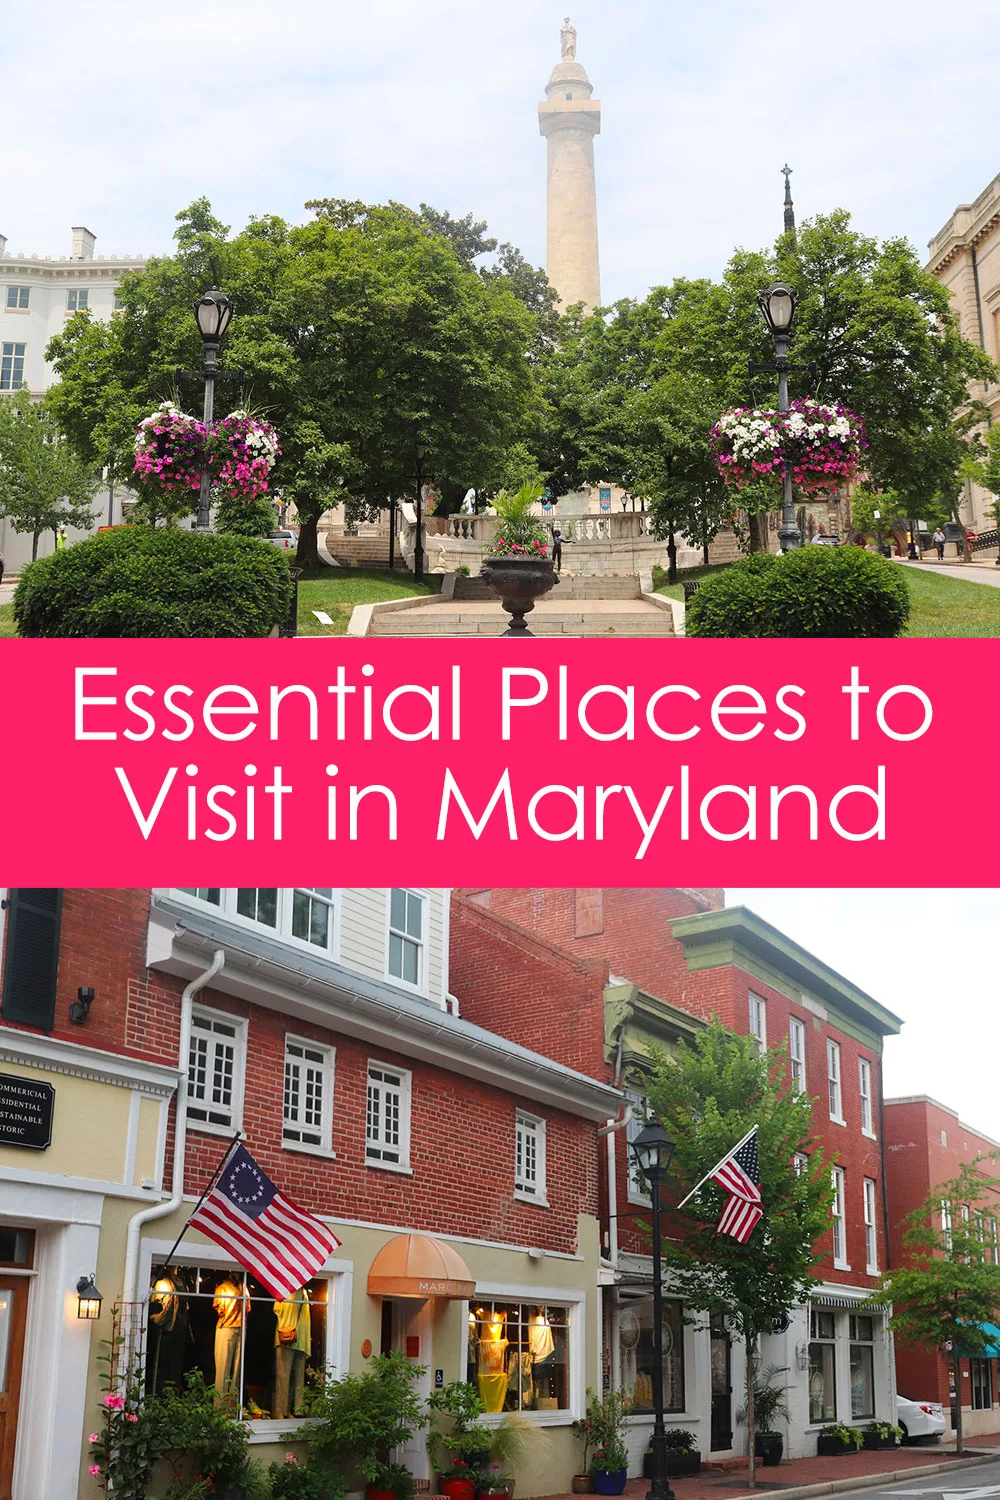 Places to Visit in Maryland